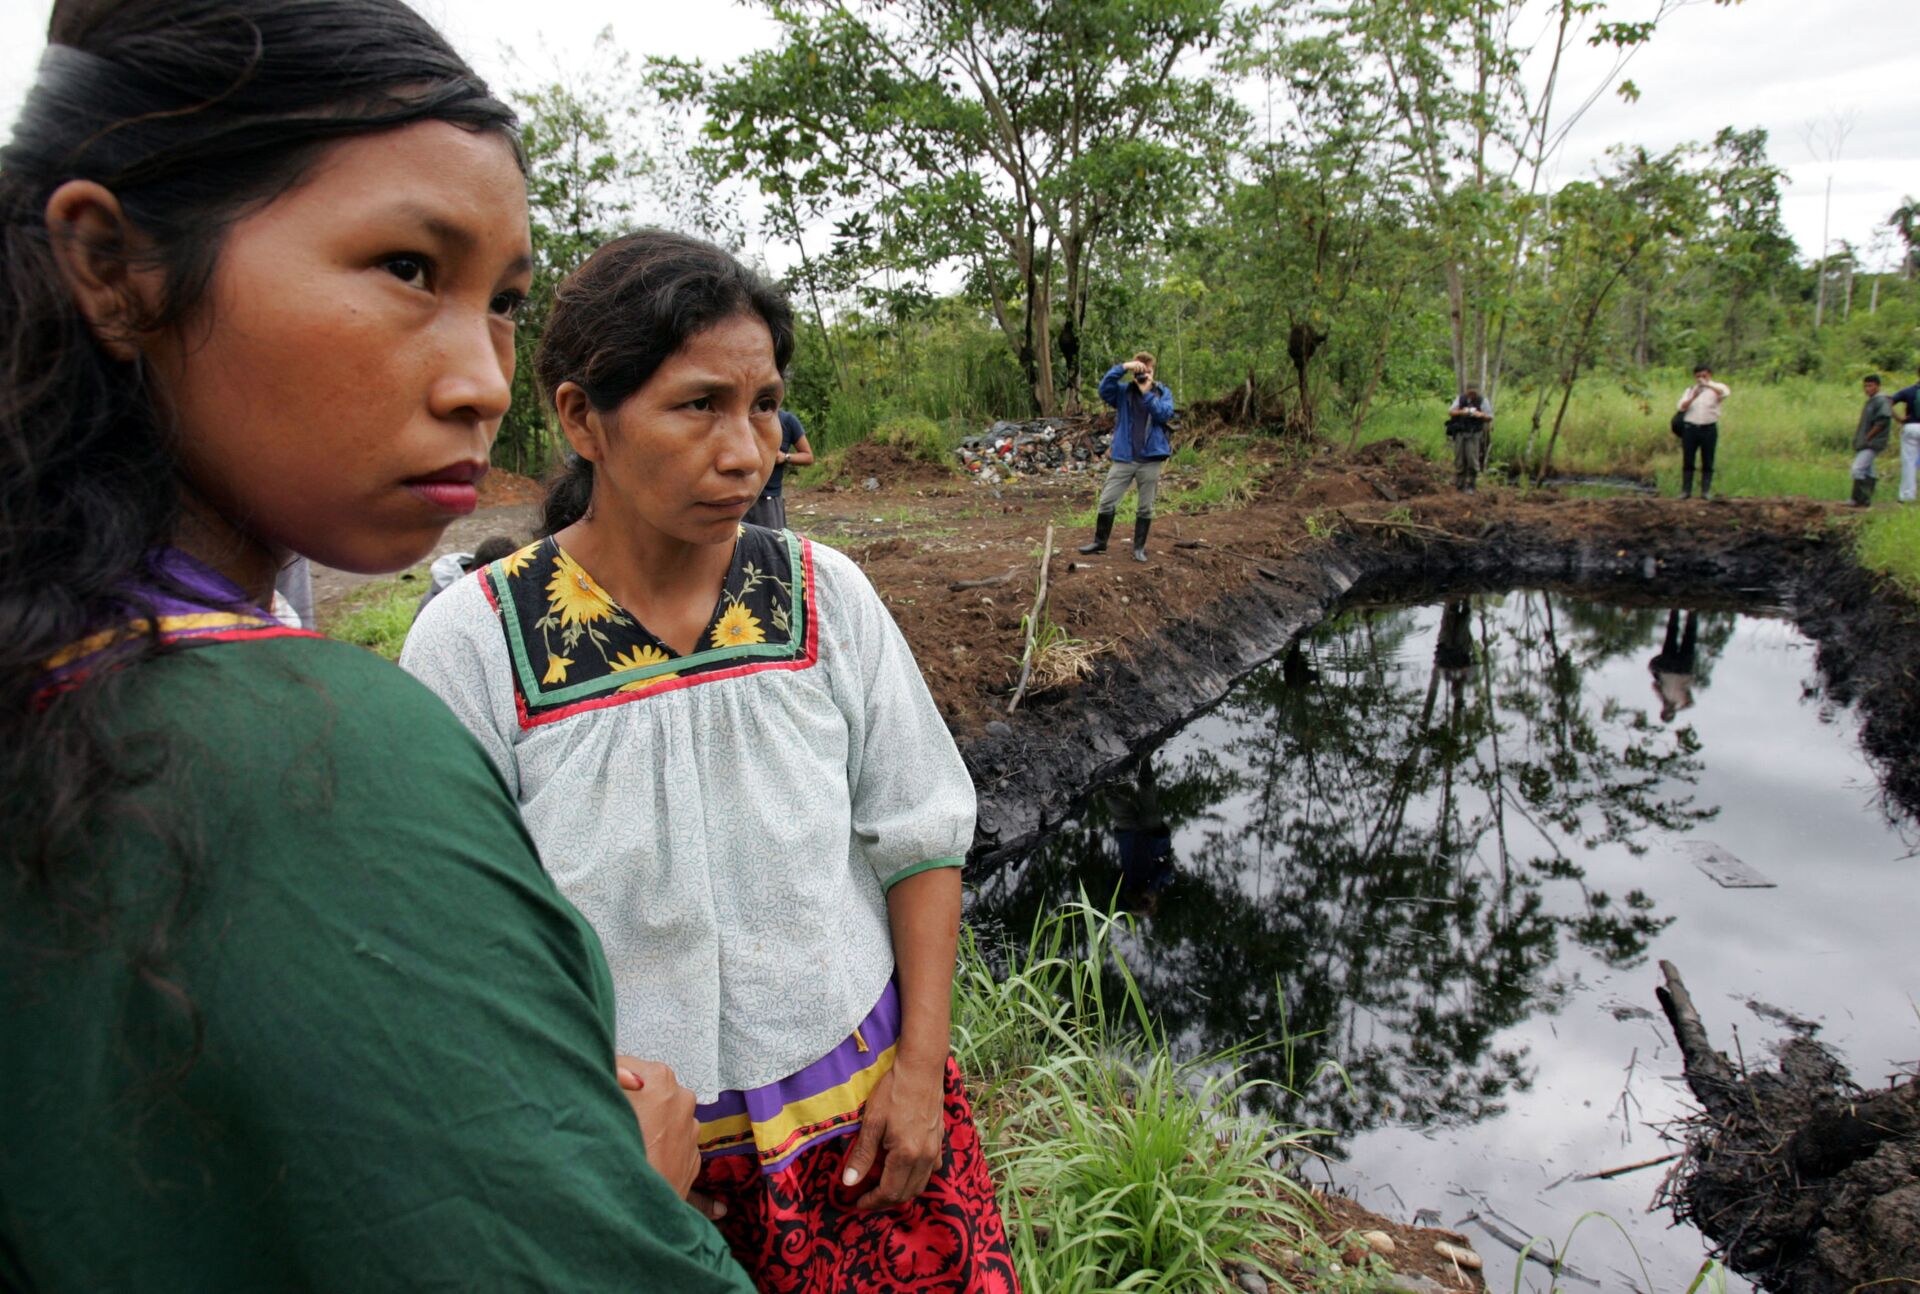 Cofan indigenous women stand near a pool of oil in Ecuador's Amazonian region, Oct. 20, 2005. Ecuador's President Rafael Correa has sided squarely with the 30,000 plaintiffs, Indians and colonists, in a class-action suit, dubbed an Amazon Chernobyl by environmentalists, over the slow poisoning of a Rhode Island-sized expanse of rainforest with millions of gallons of oil and billions more of toxic wastewater. - Sputnik International, 1920, 07.09.2021